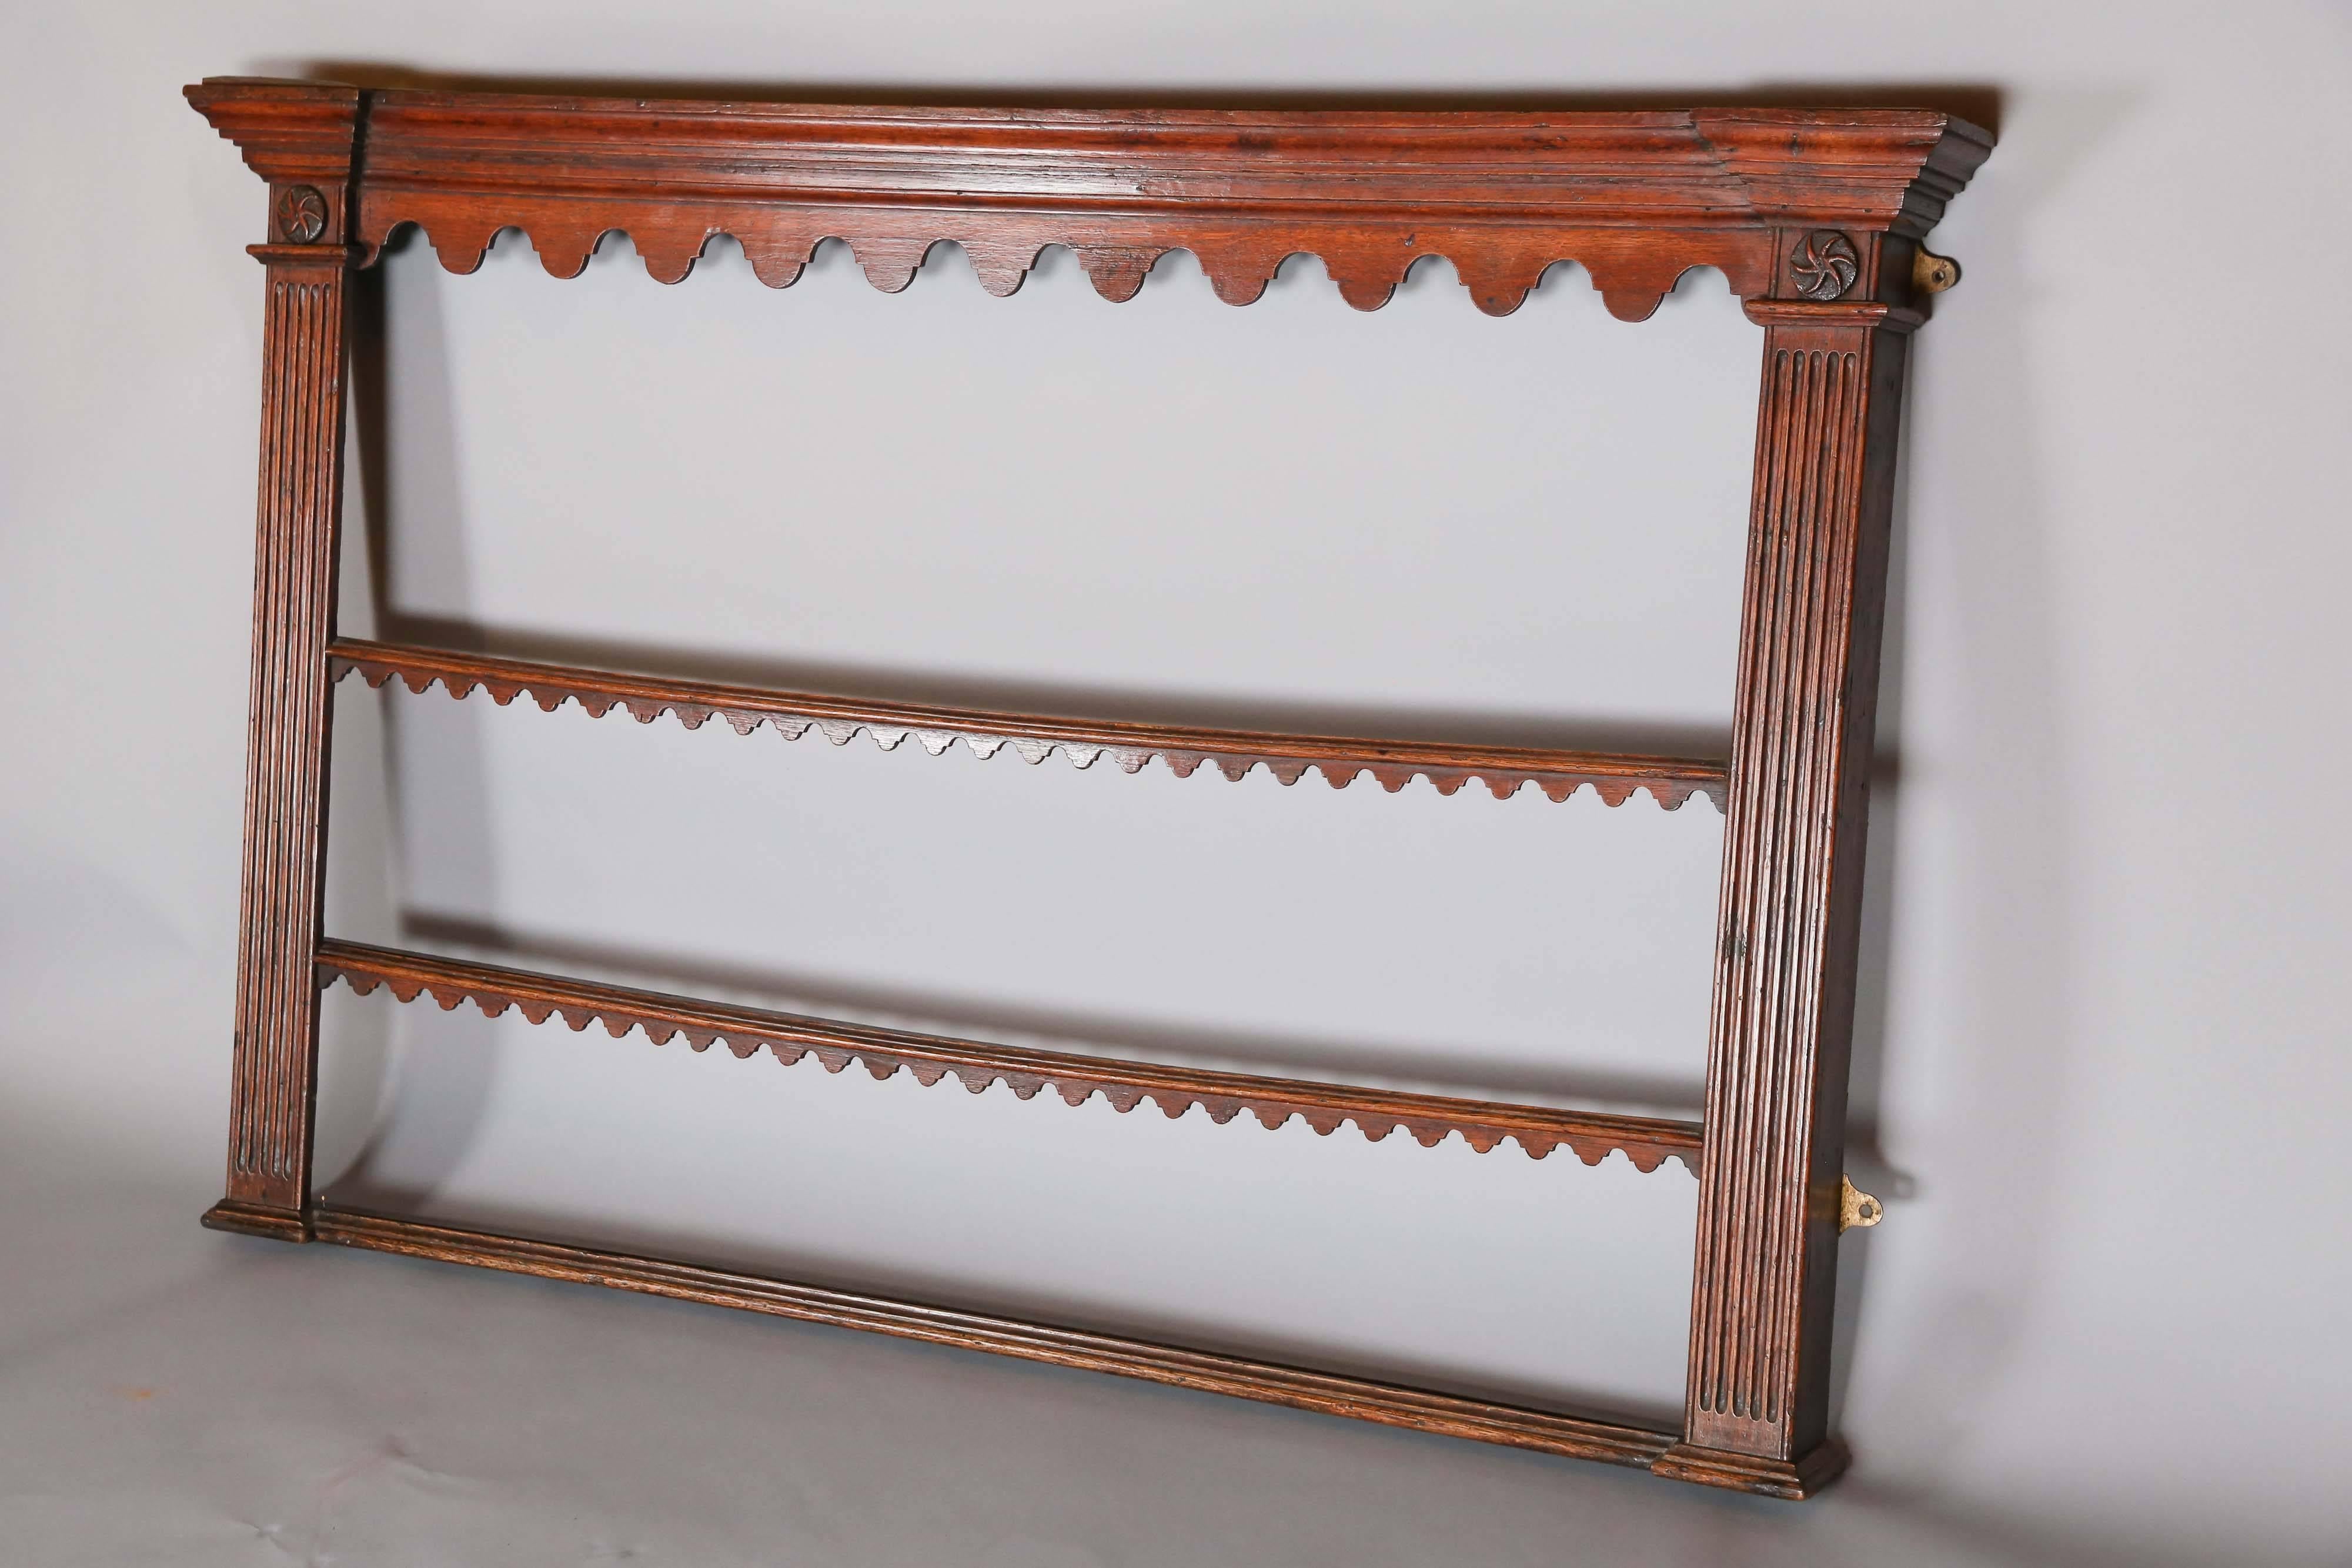 George III Period Oak Plate Rack In Excellent Condition For Sale In Houston, TX